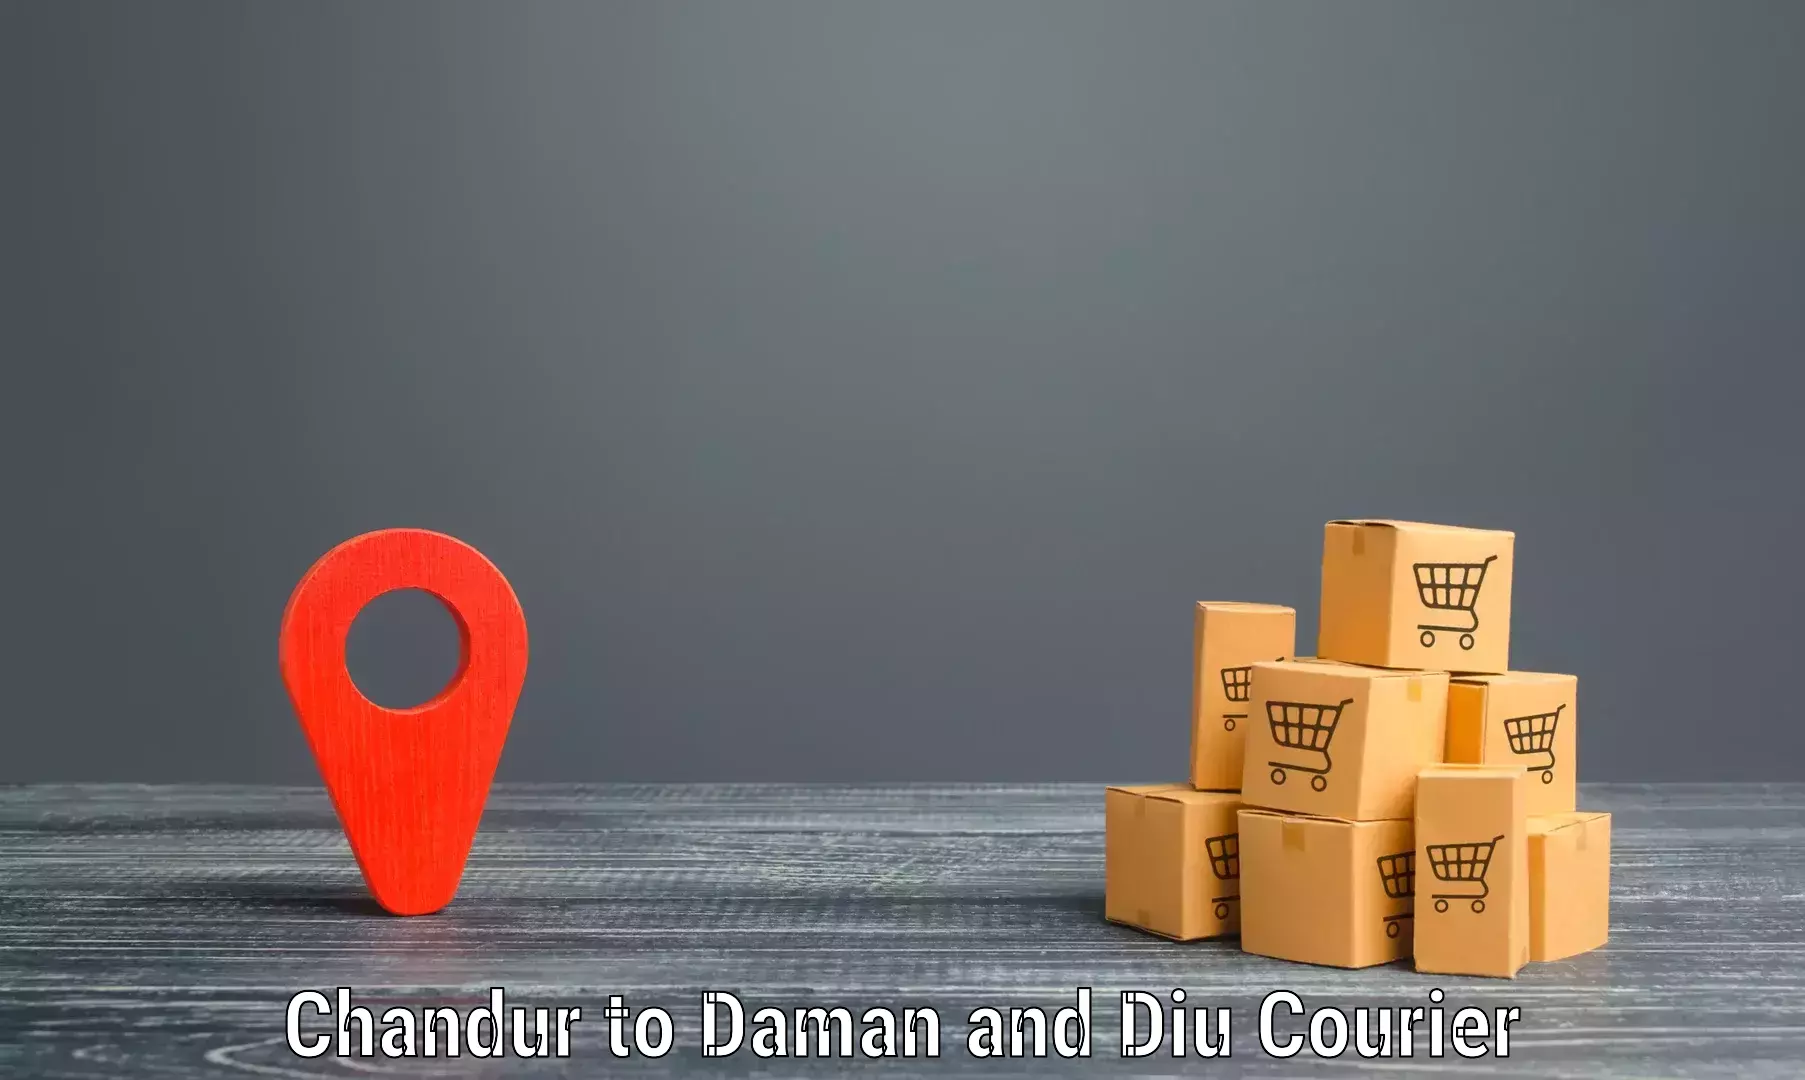 State-of-the-art courier technology Chandur to Daman and Diu